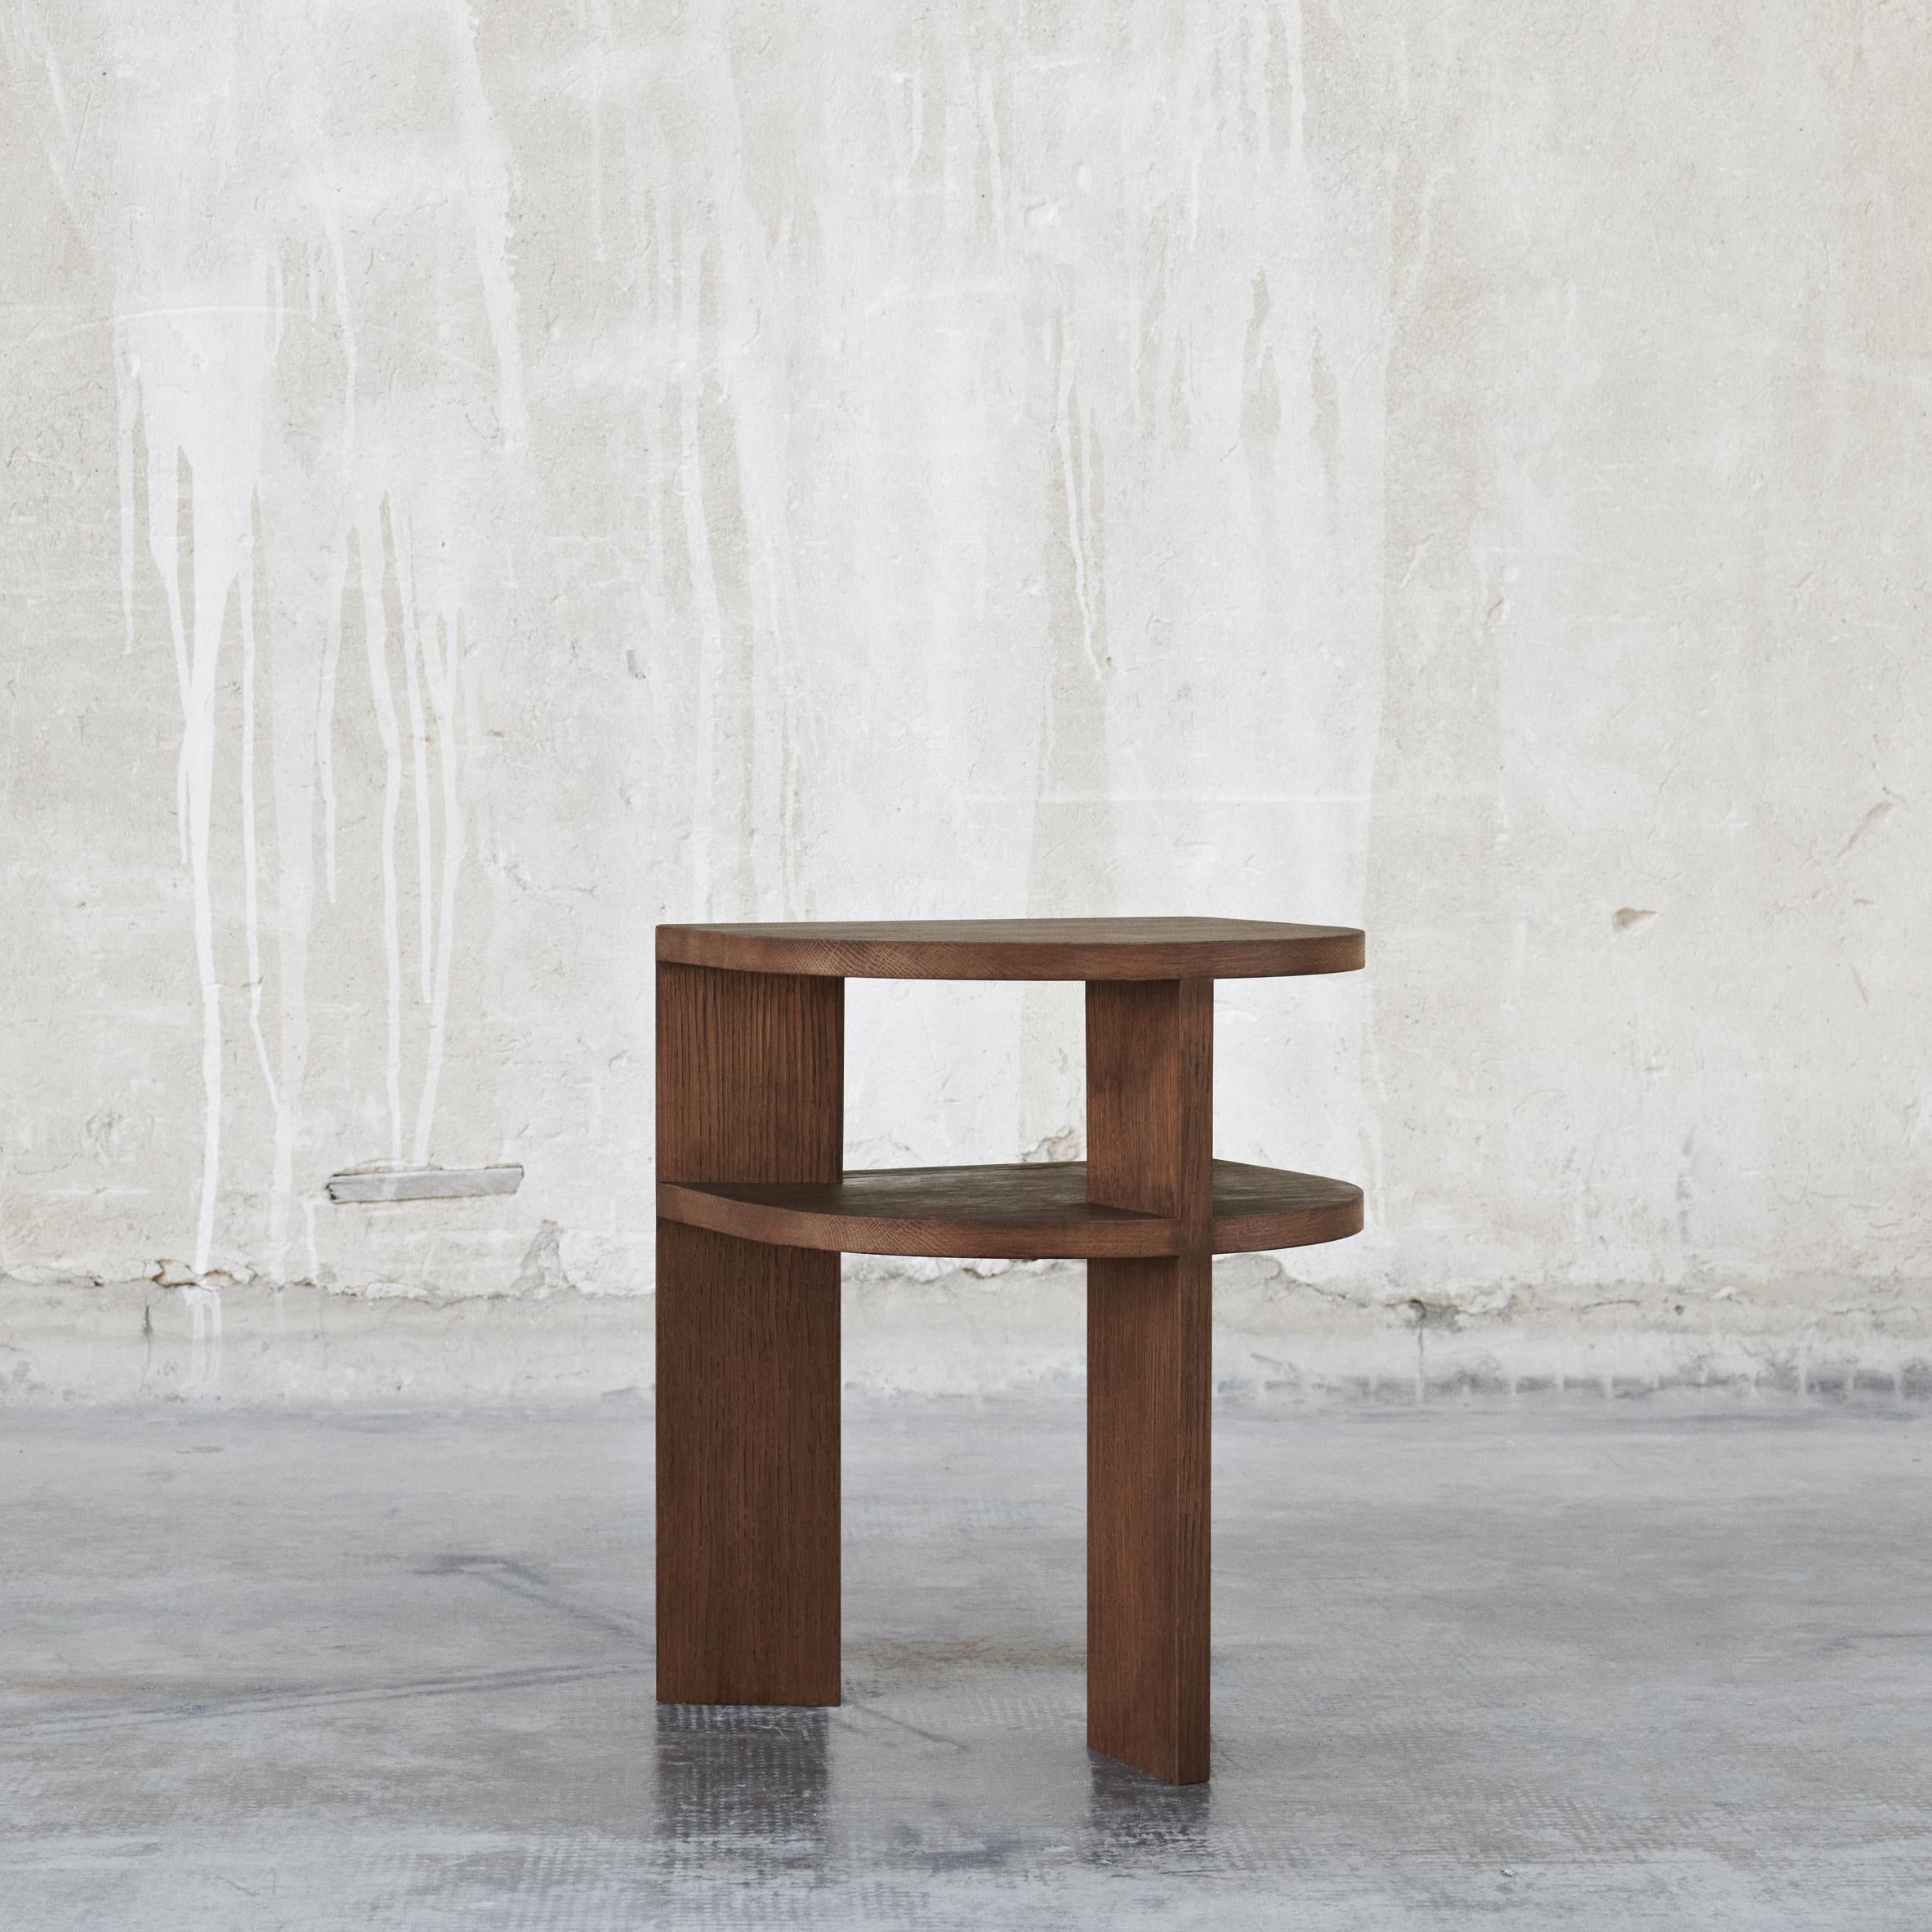 TR Side Table by Fora Projects 
Designed by Theresa Rand

Material: Oak wood 
Color: Medium brown
Brown surface treatment with non-toxic hardwax oil

Dimensions:

H: 55, L: 40, W: 45 cm

_______________

The TR side table was designed by Danish